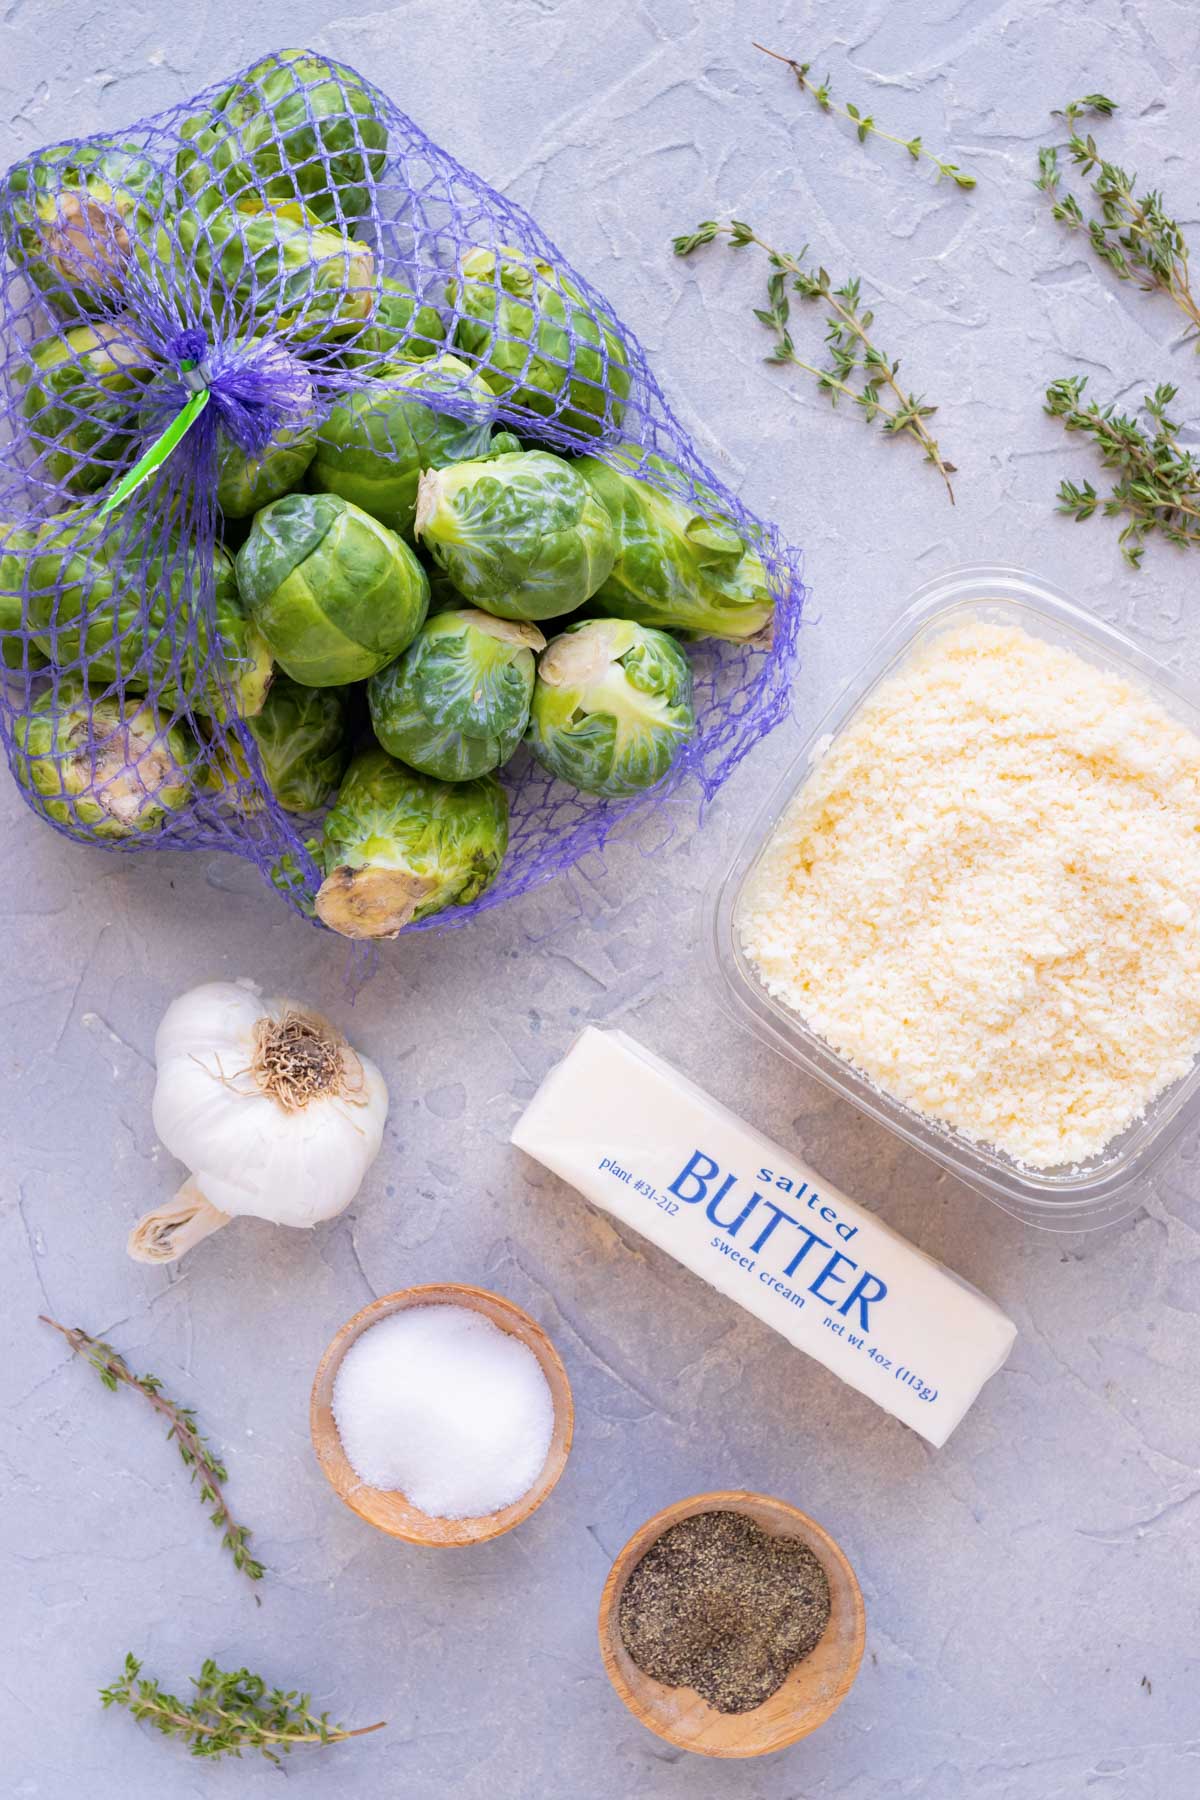 A one pound bag of Brussels sprouts, Parmesan cheese, butter, garlic, and herbs as the ingredients in a roasted Brussels sprouts recipe.